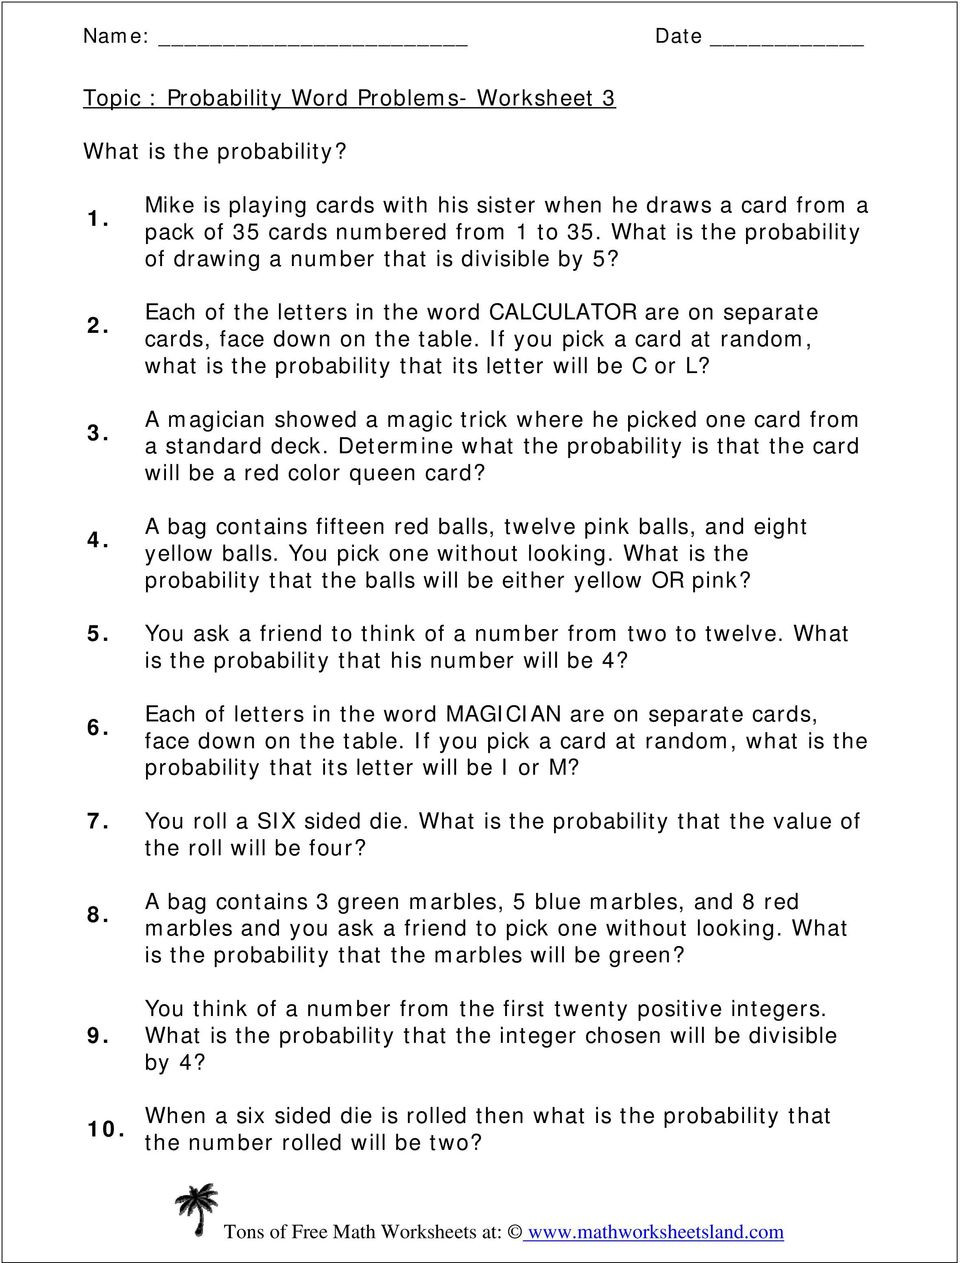 Simple Probability Worksheet Pdf A Magician Showed A Magic Trick where He Picked One Card